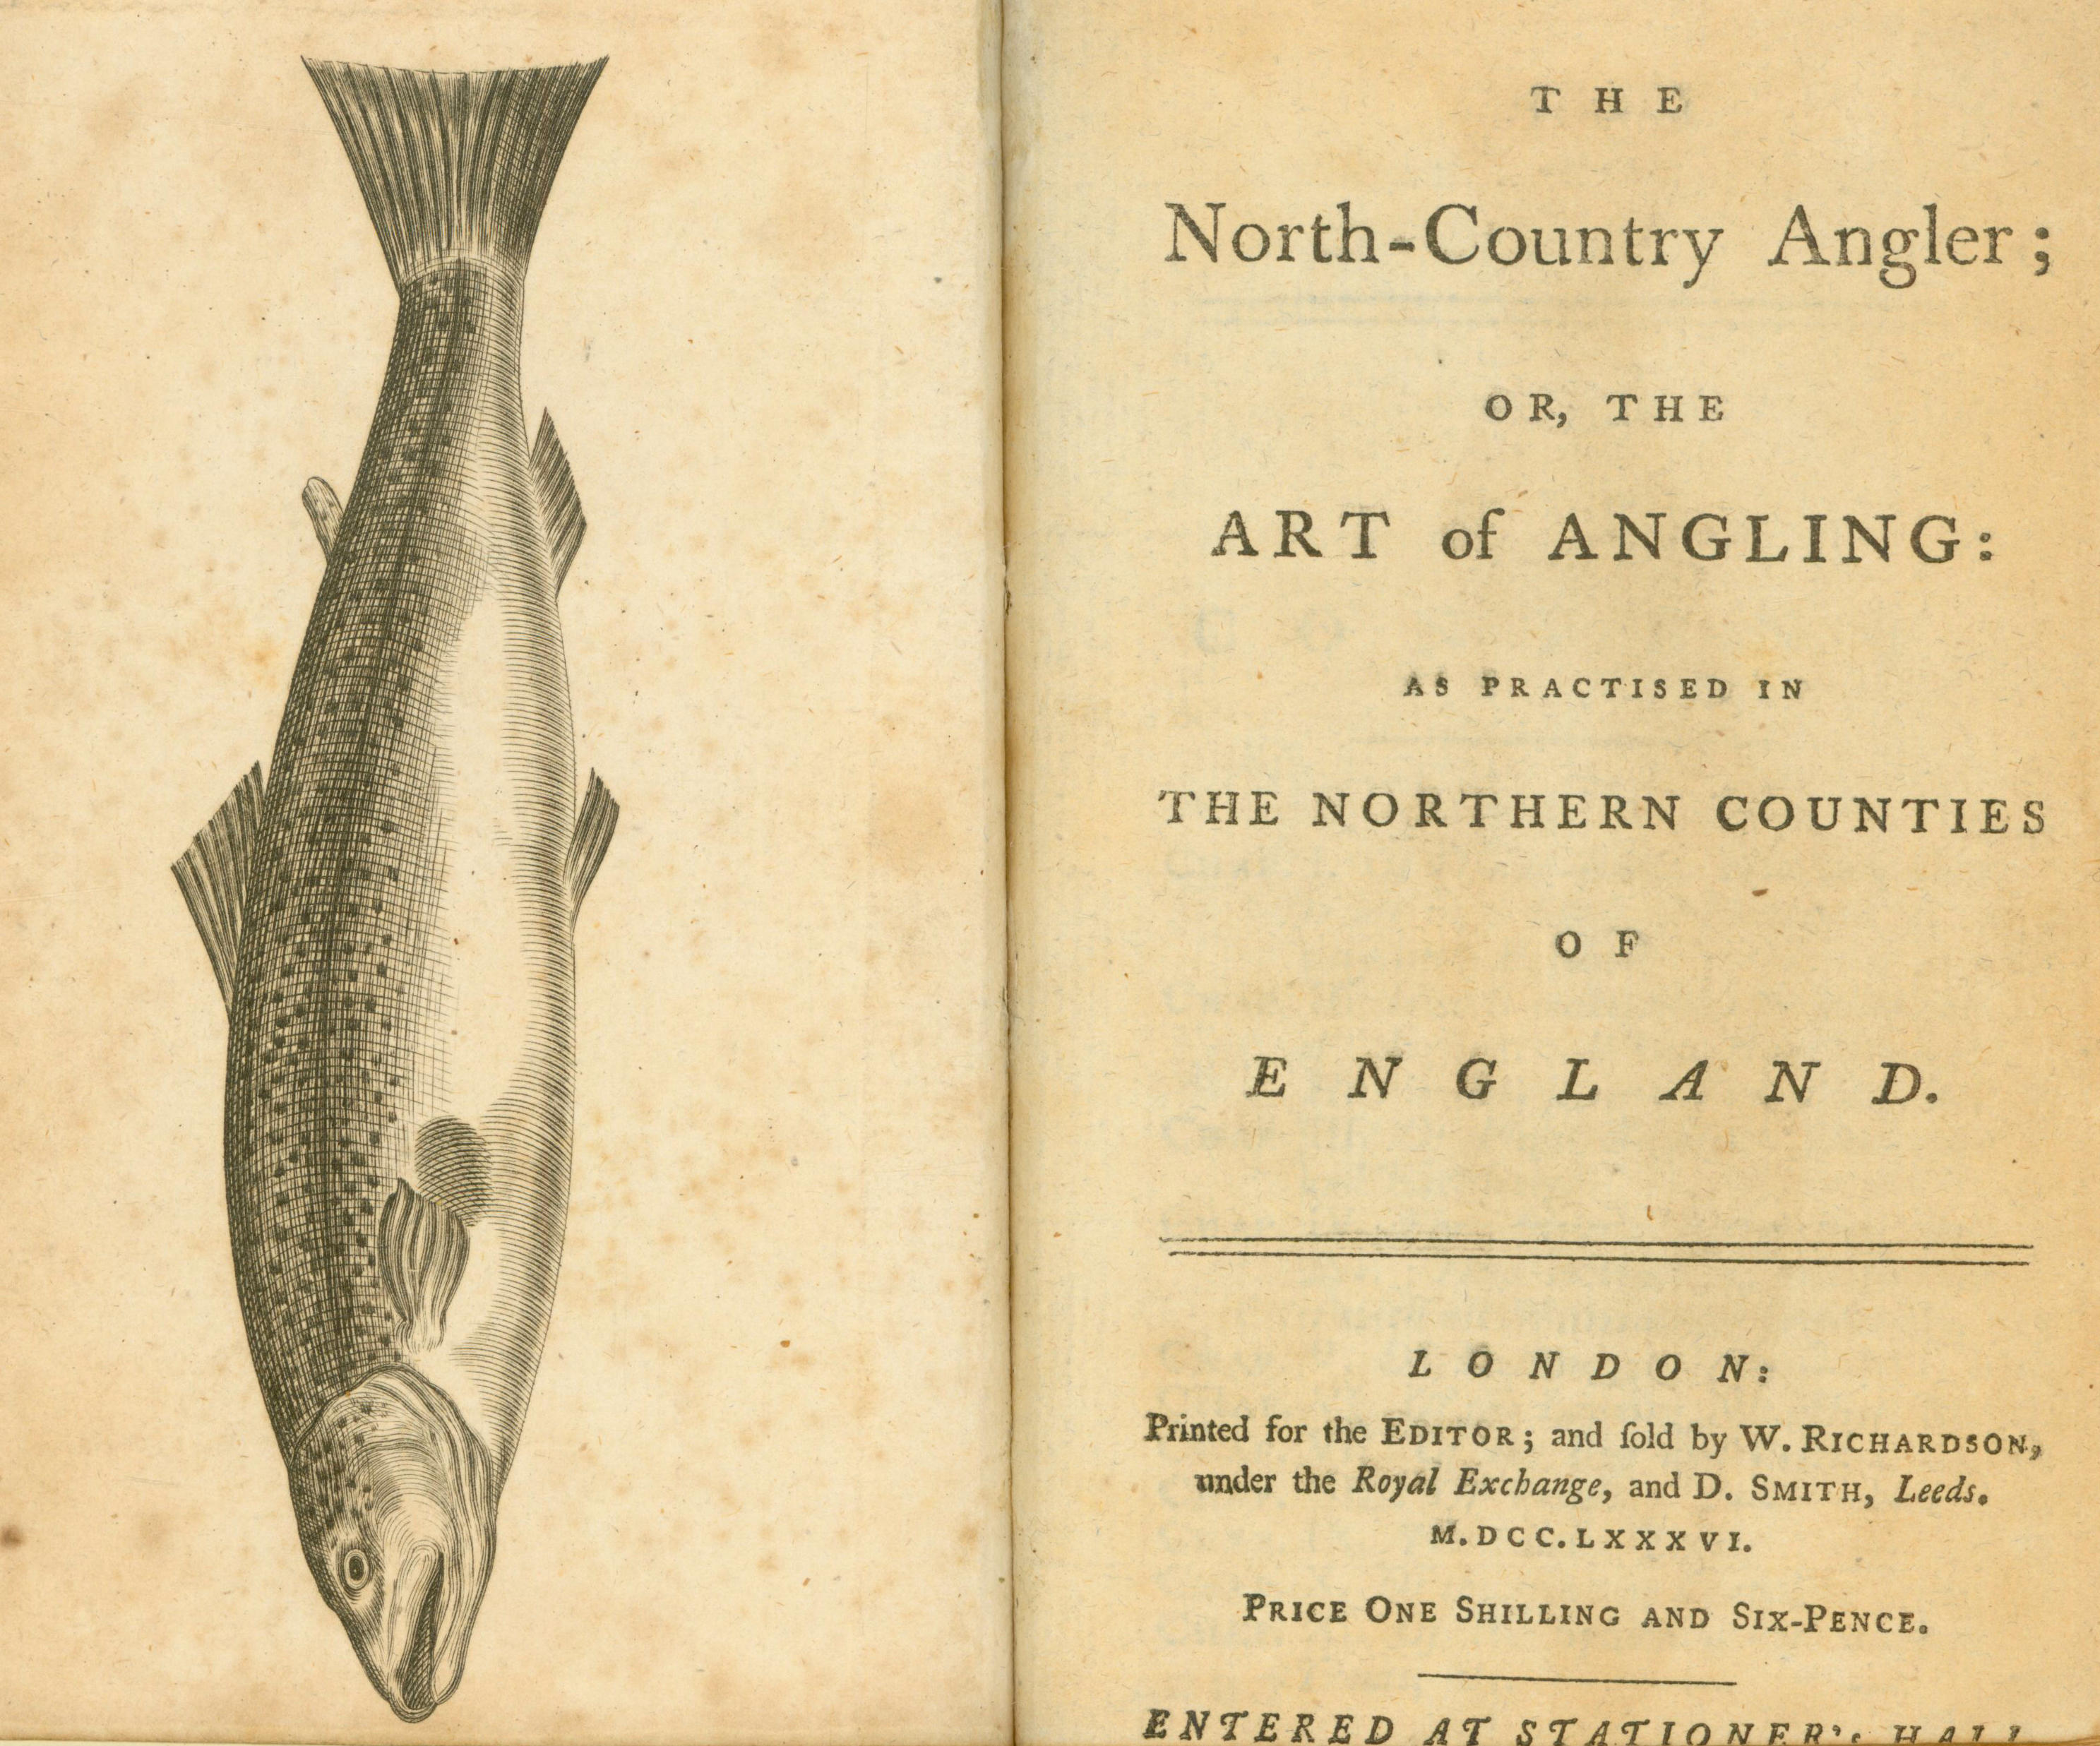 NORTH-COUNTRY ANGLER